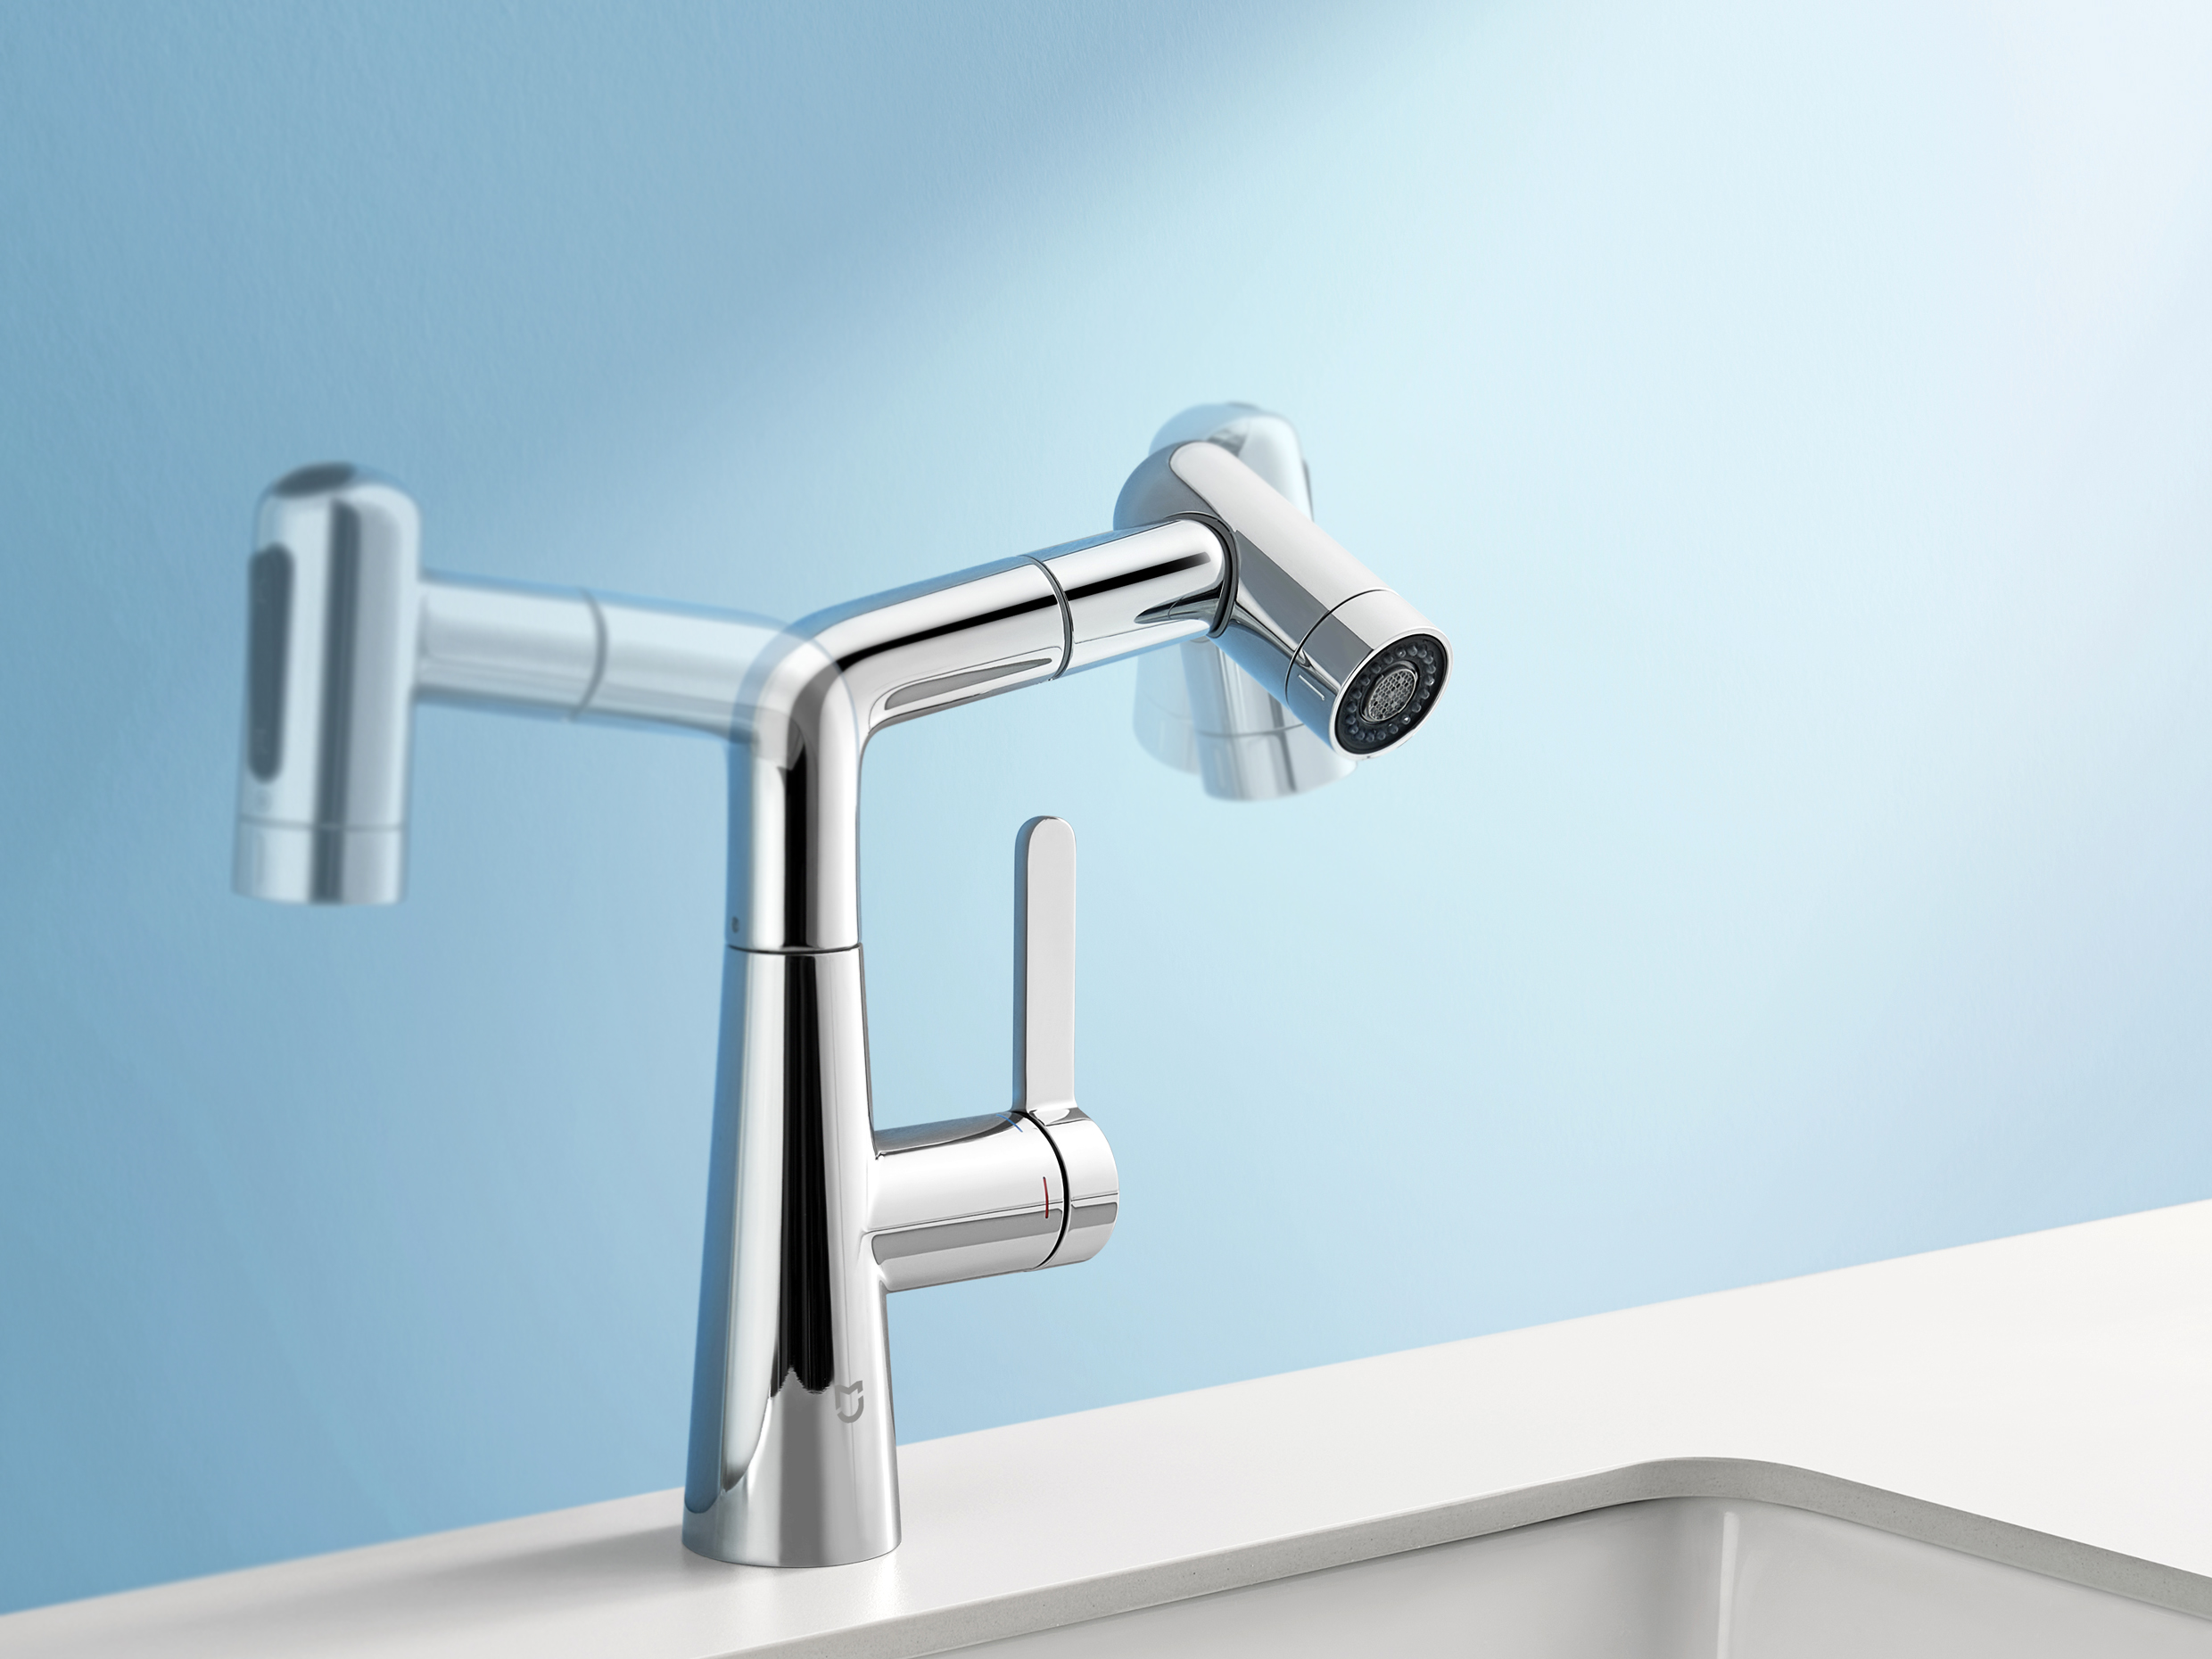 Mijia Pull-Down Type Basin Faucet S1